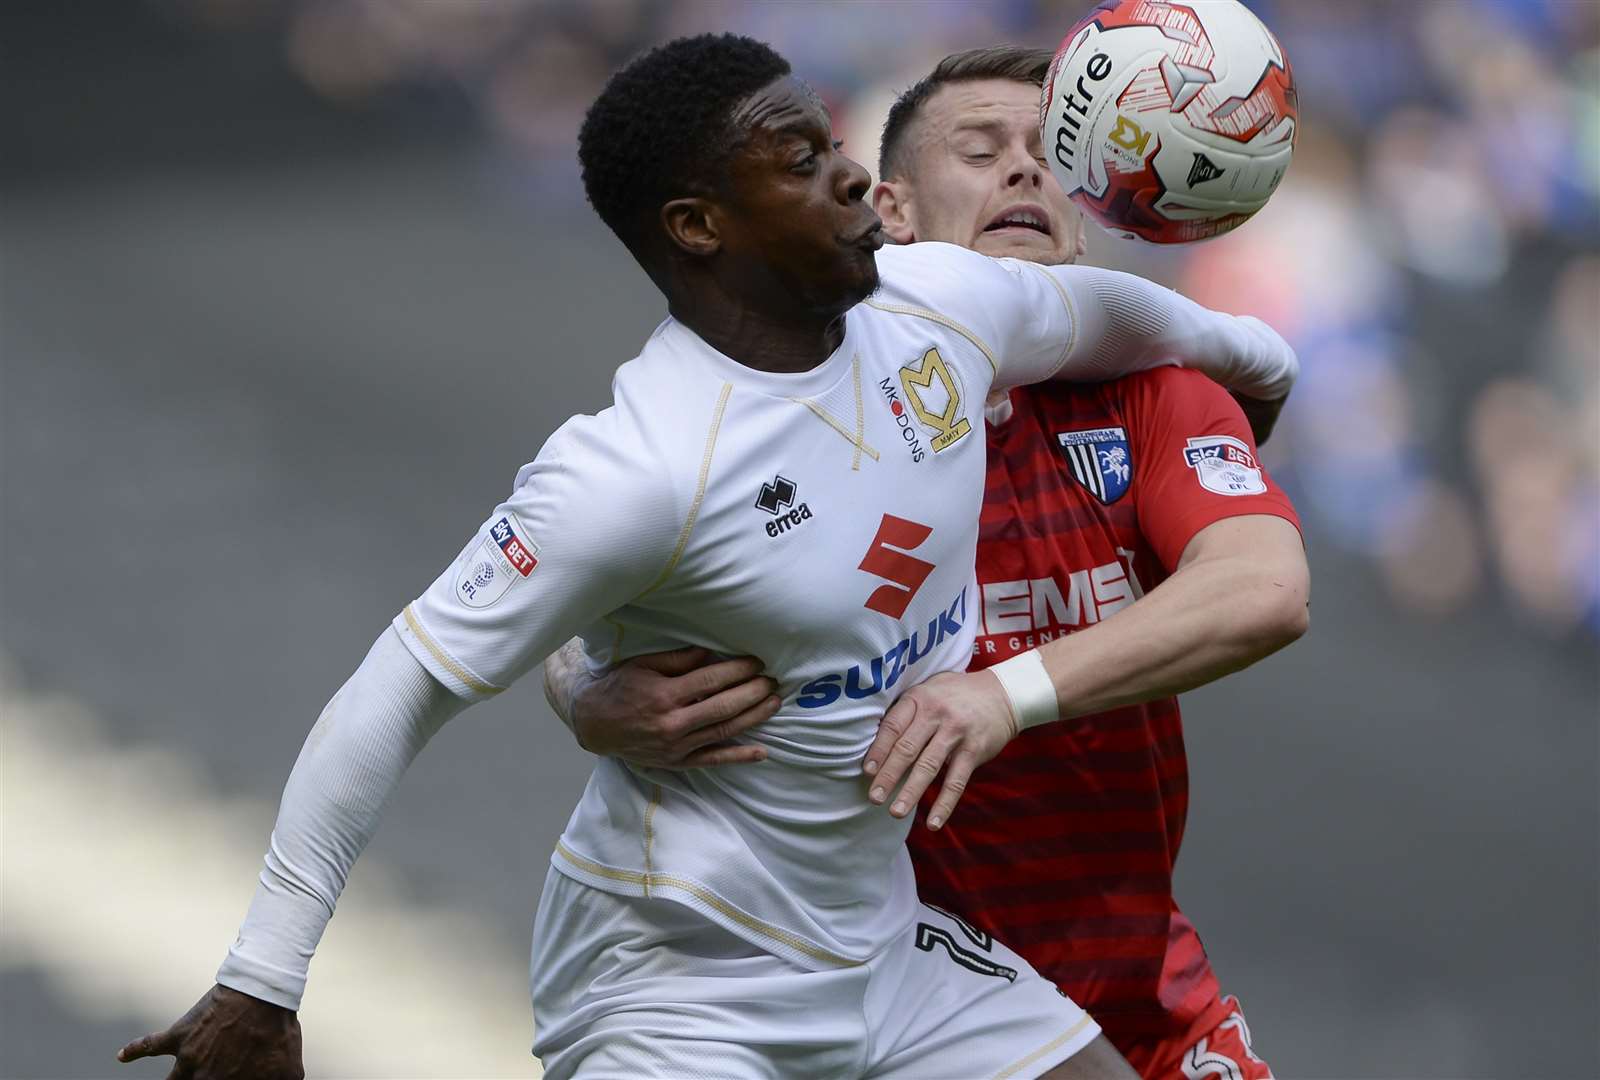 Gillingham’s Mark Byrne loses out to Kieran Agard during their game with MK Dons in 2017